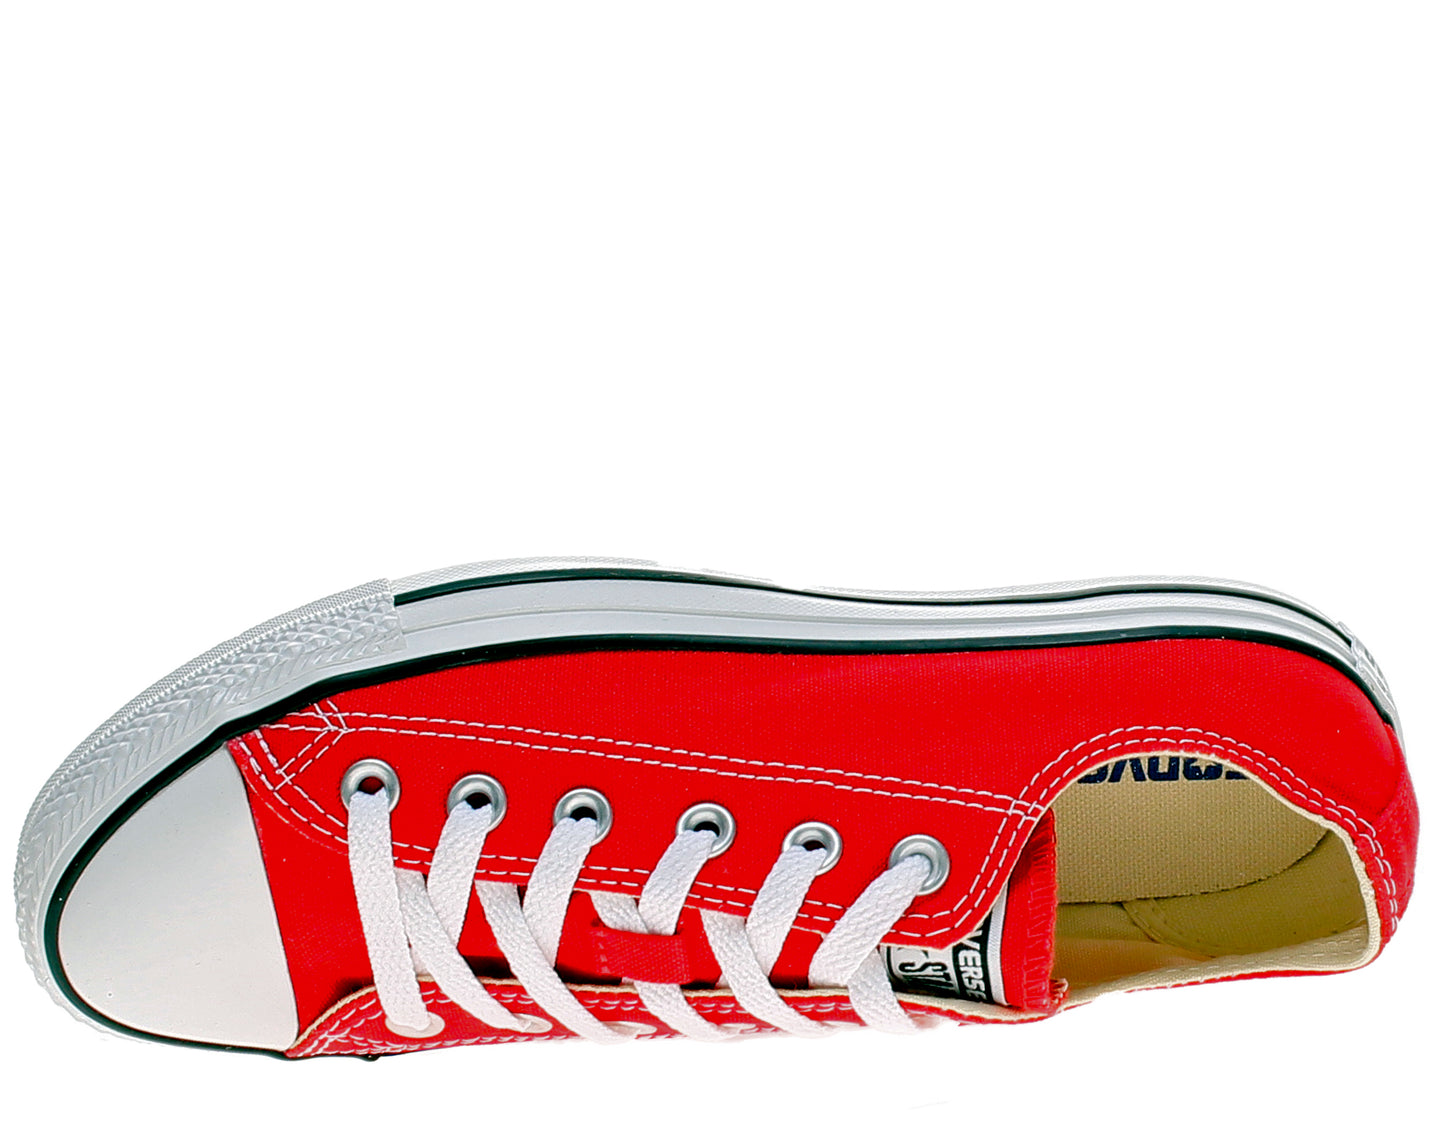 Converse Chuck Taylor All Star OX Red Low Top Sneakers M9696